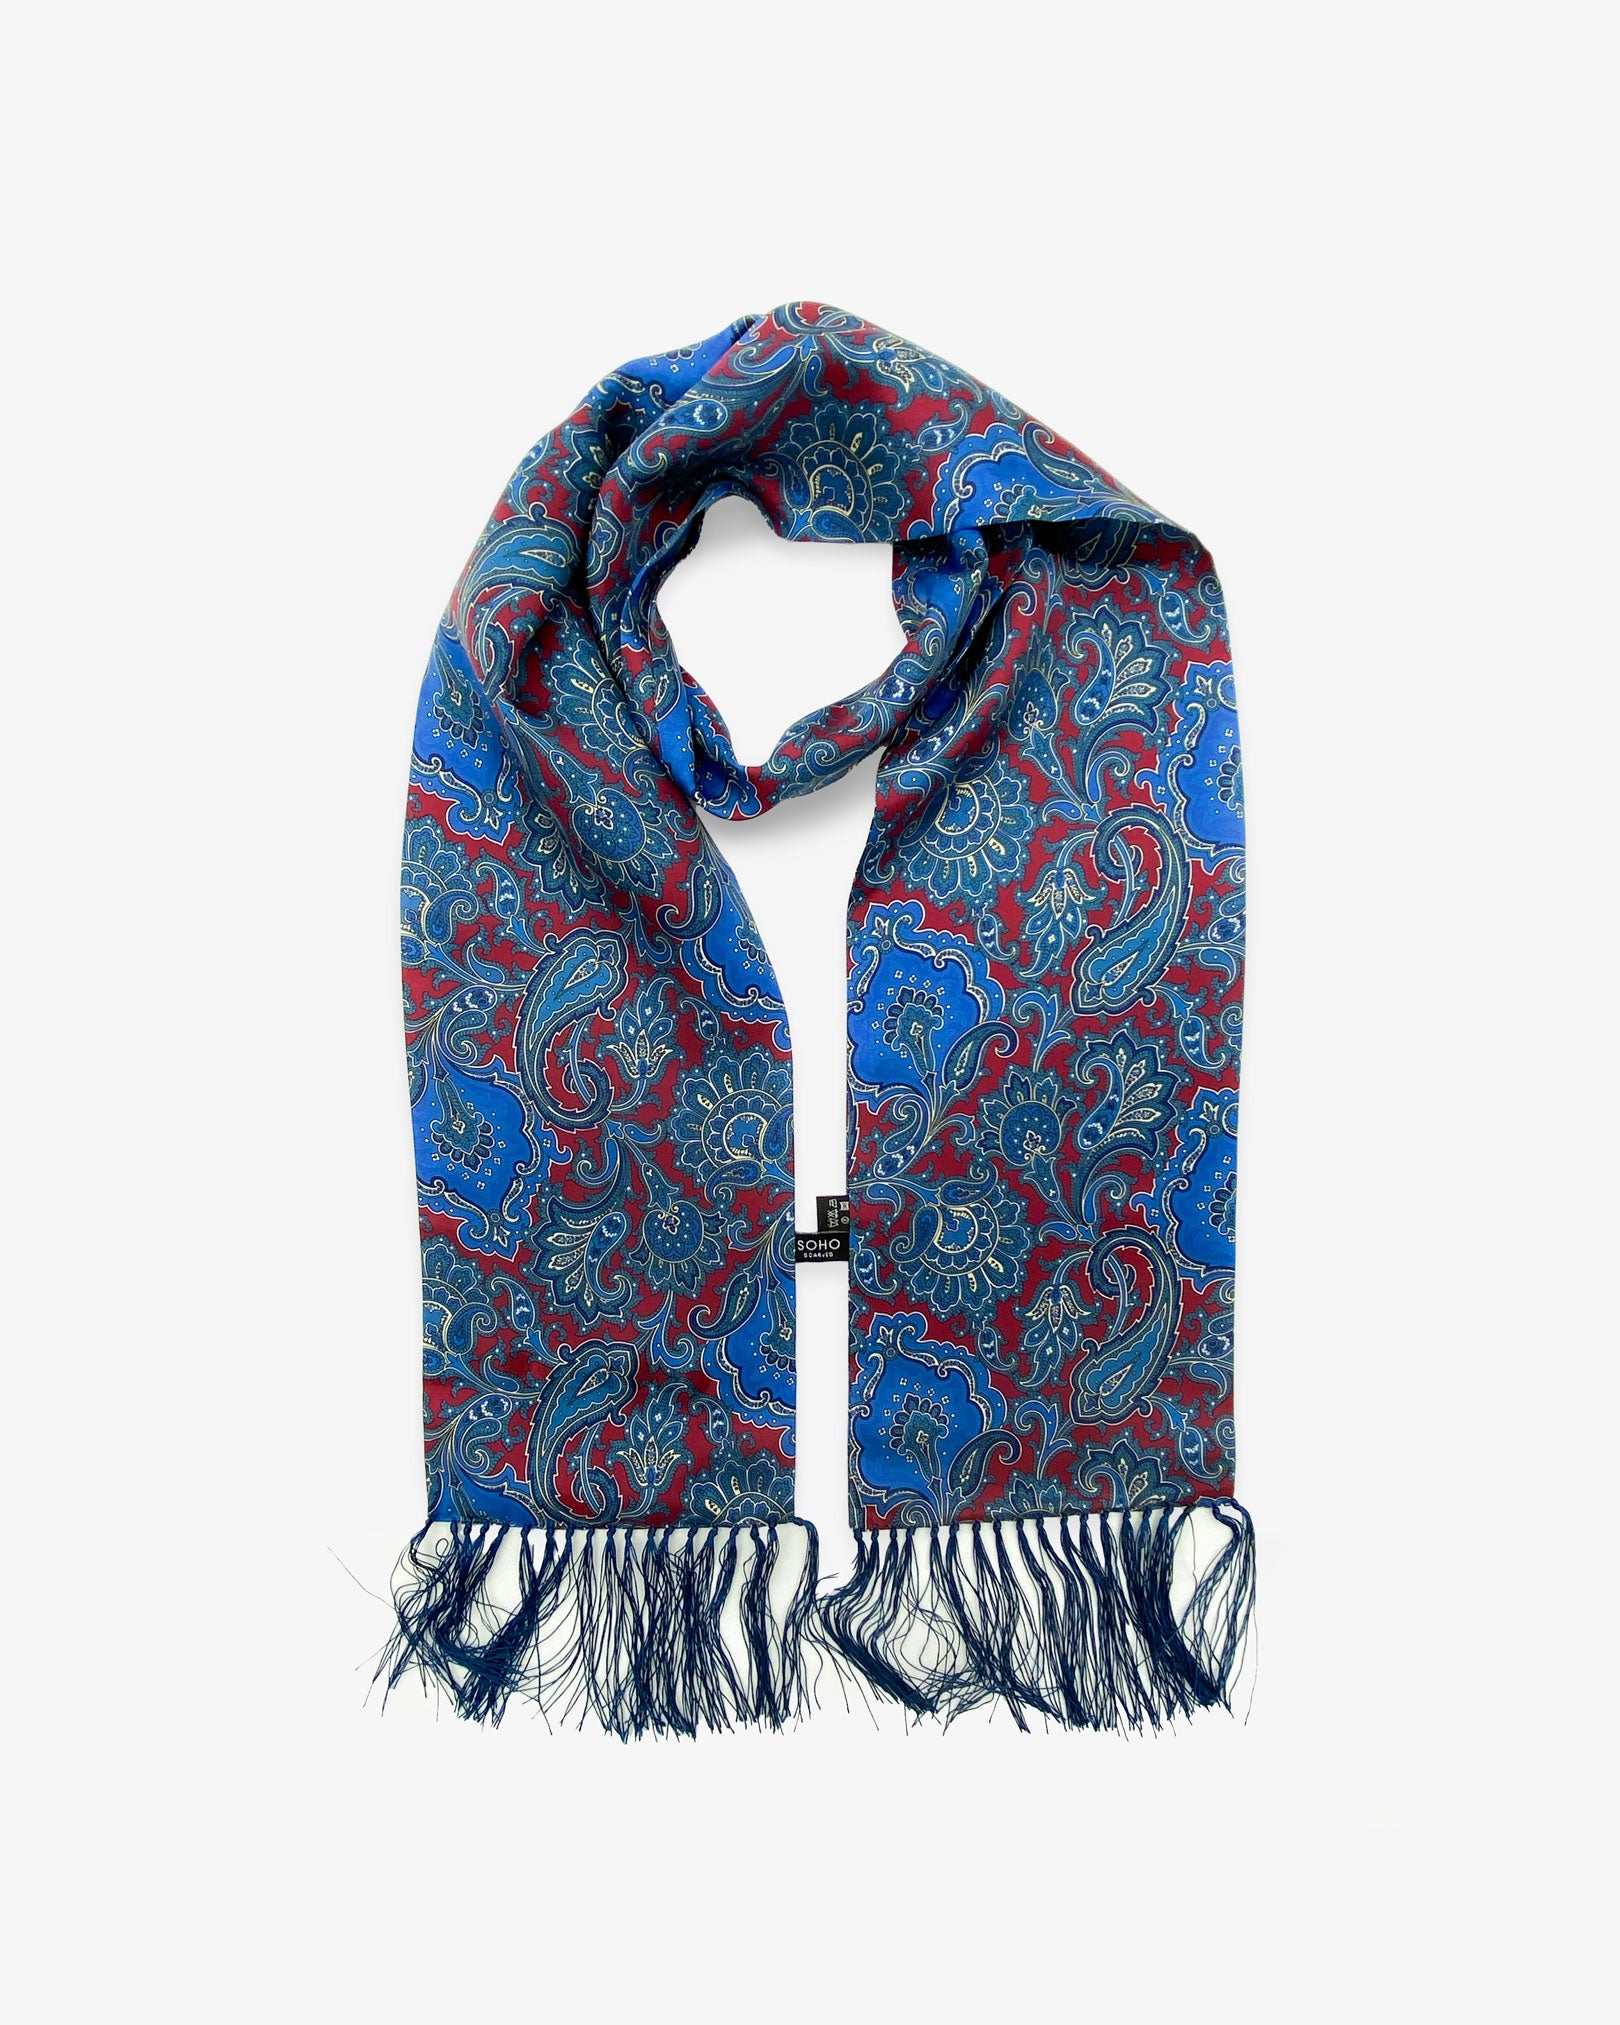 Looped view of the 'Dean' silk aviator scarf, clearly showing the burgundy and blue patterns and a matching 3-inch fringe.